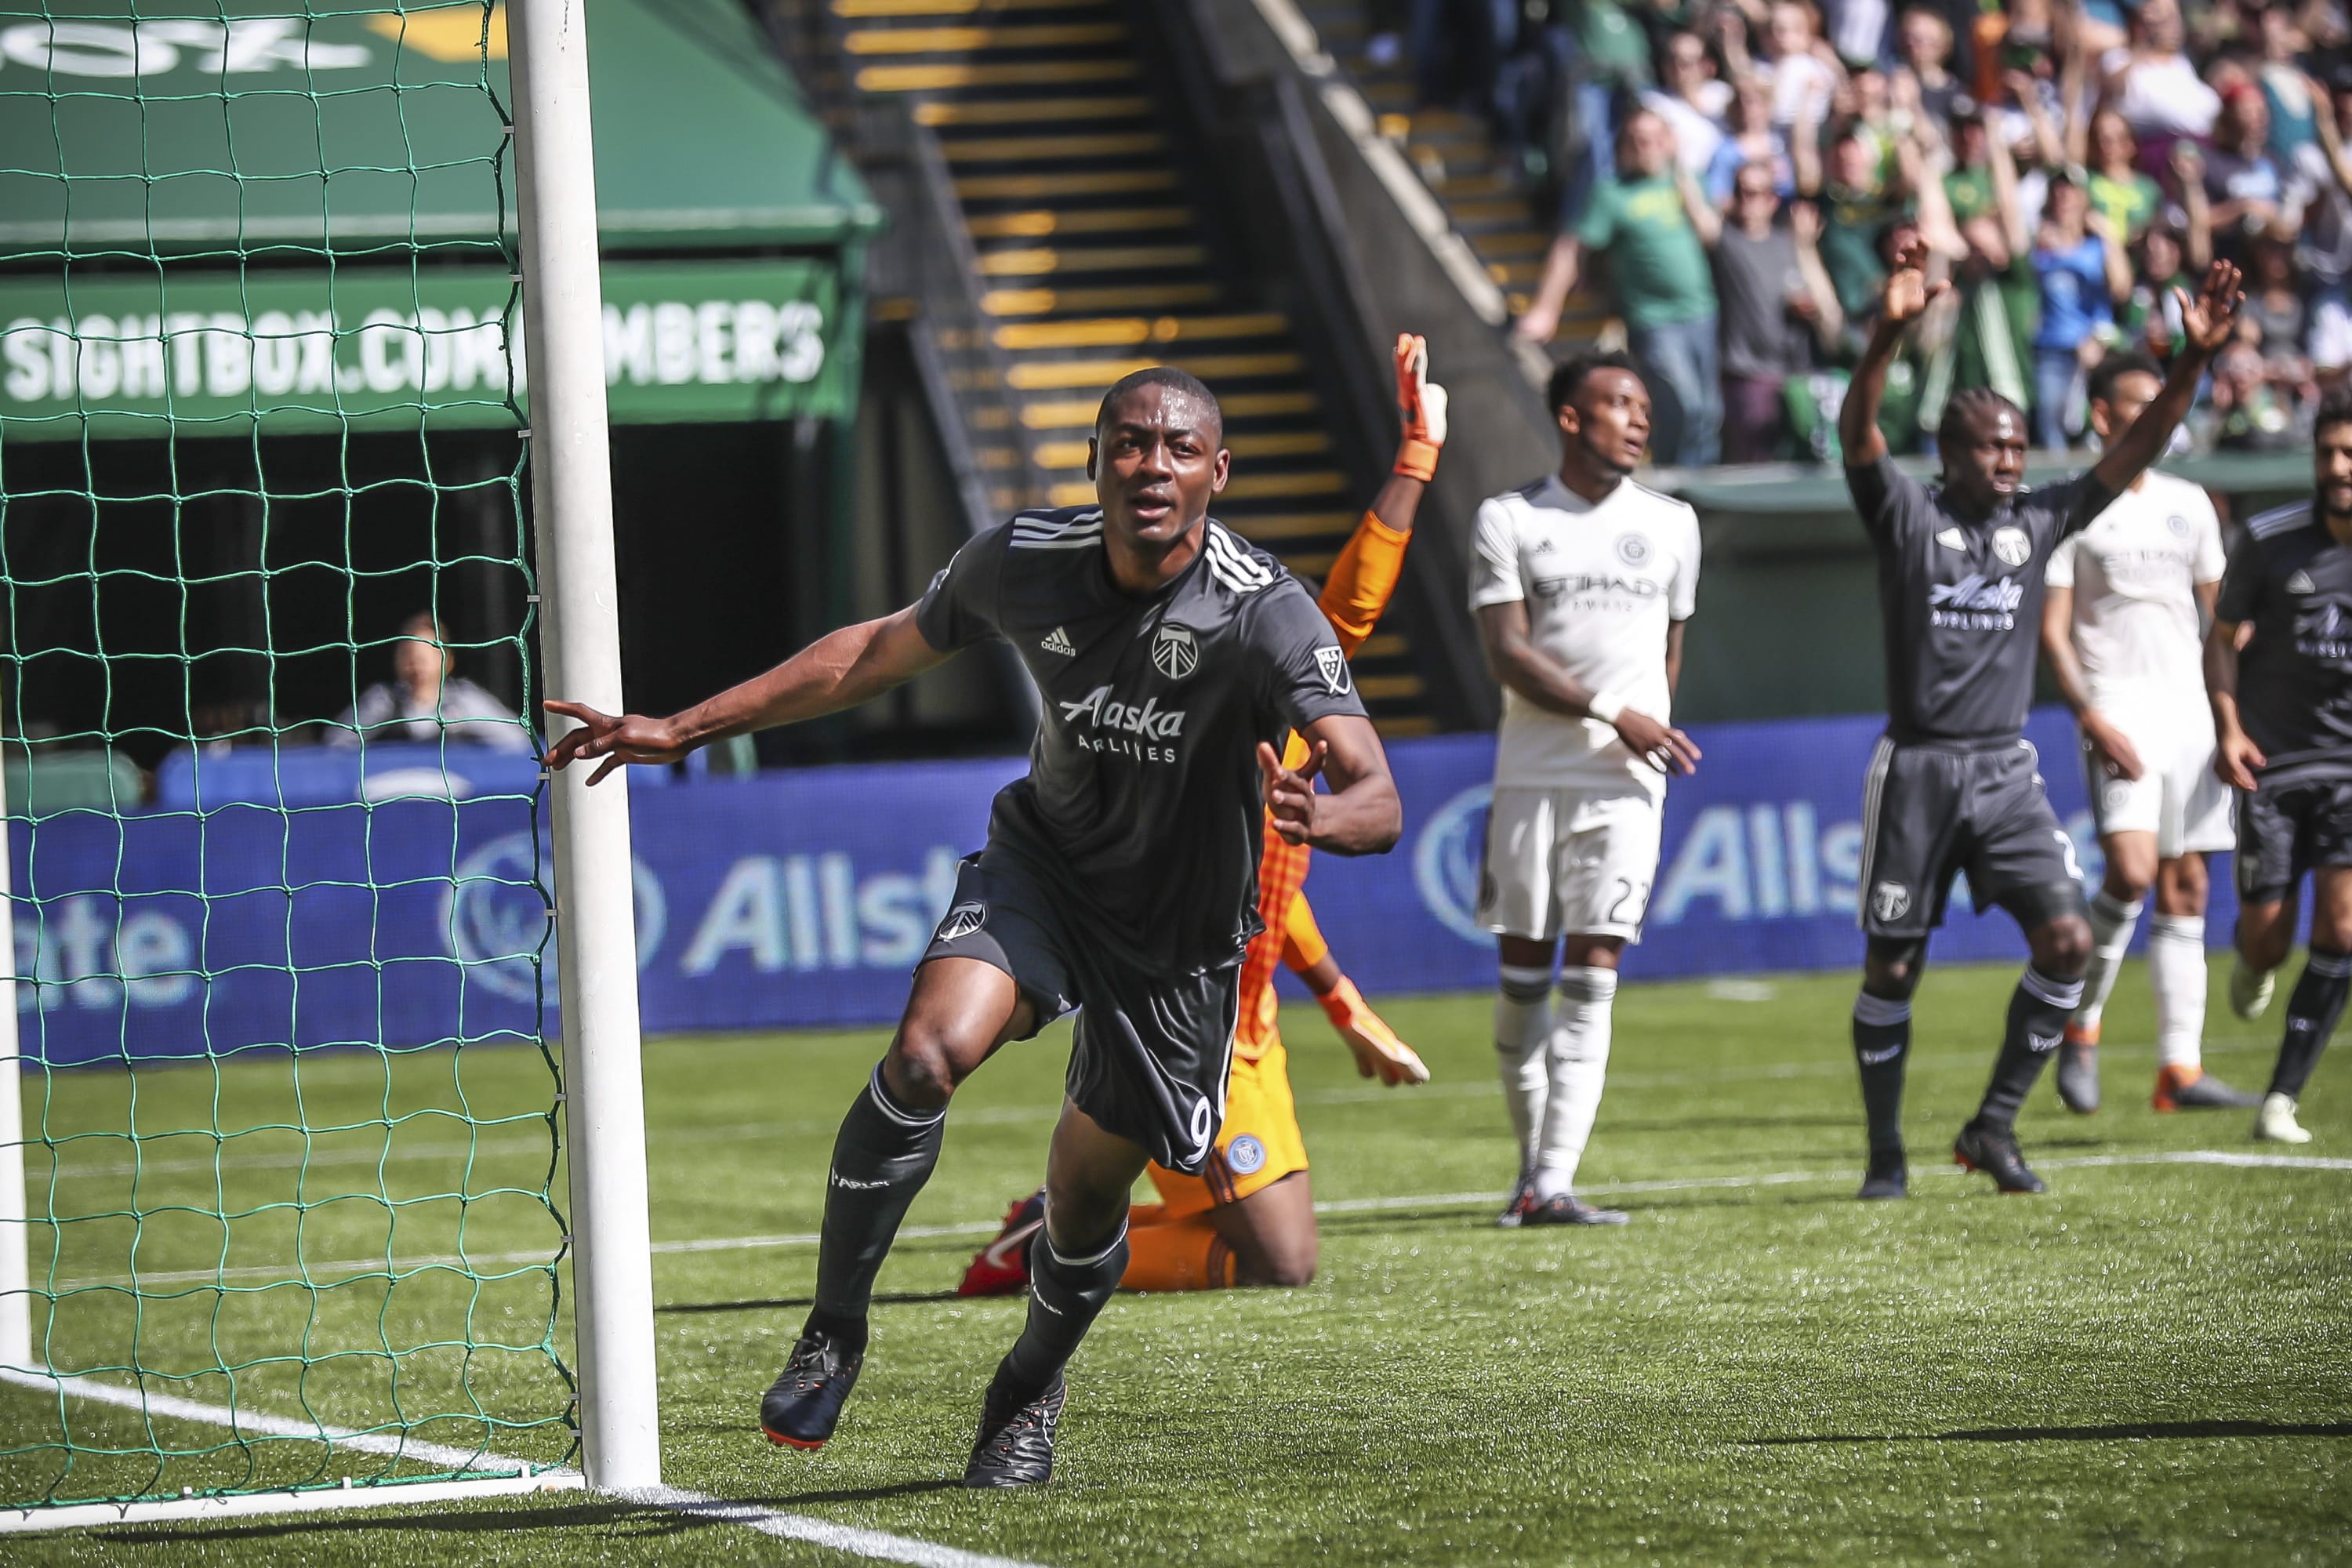 Portland Timbers forward Fanendo Adi celebrates his second goal of the season during an MLS soccer match against New York City FC in Portland, Ore., Sunday, April 22, 2018.